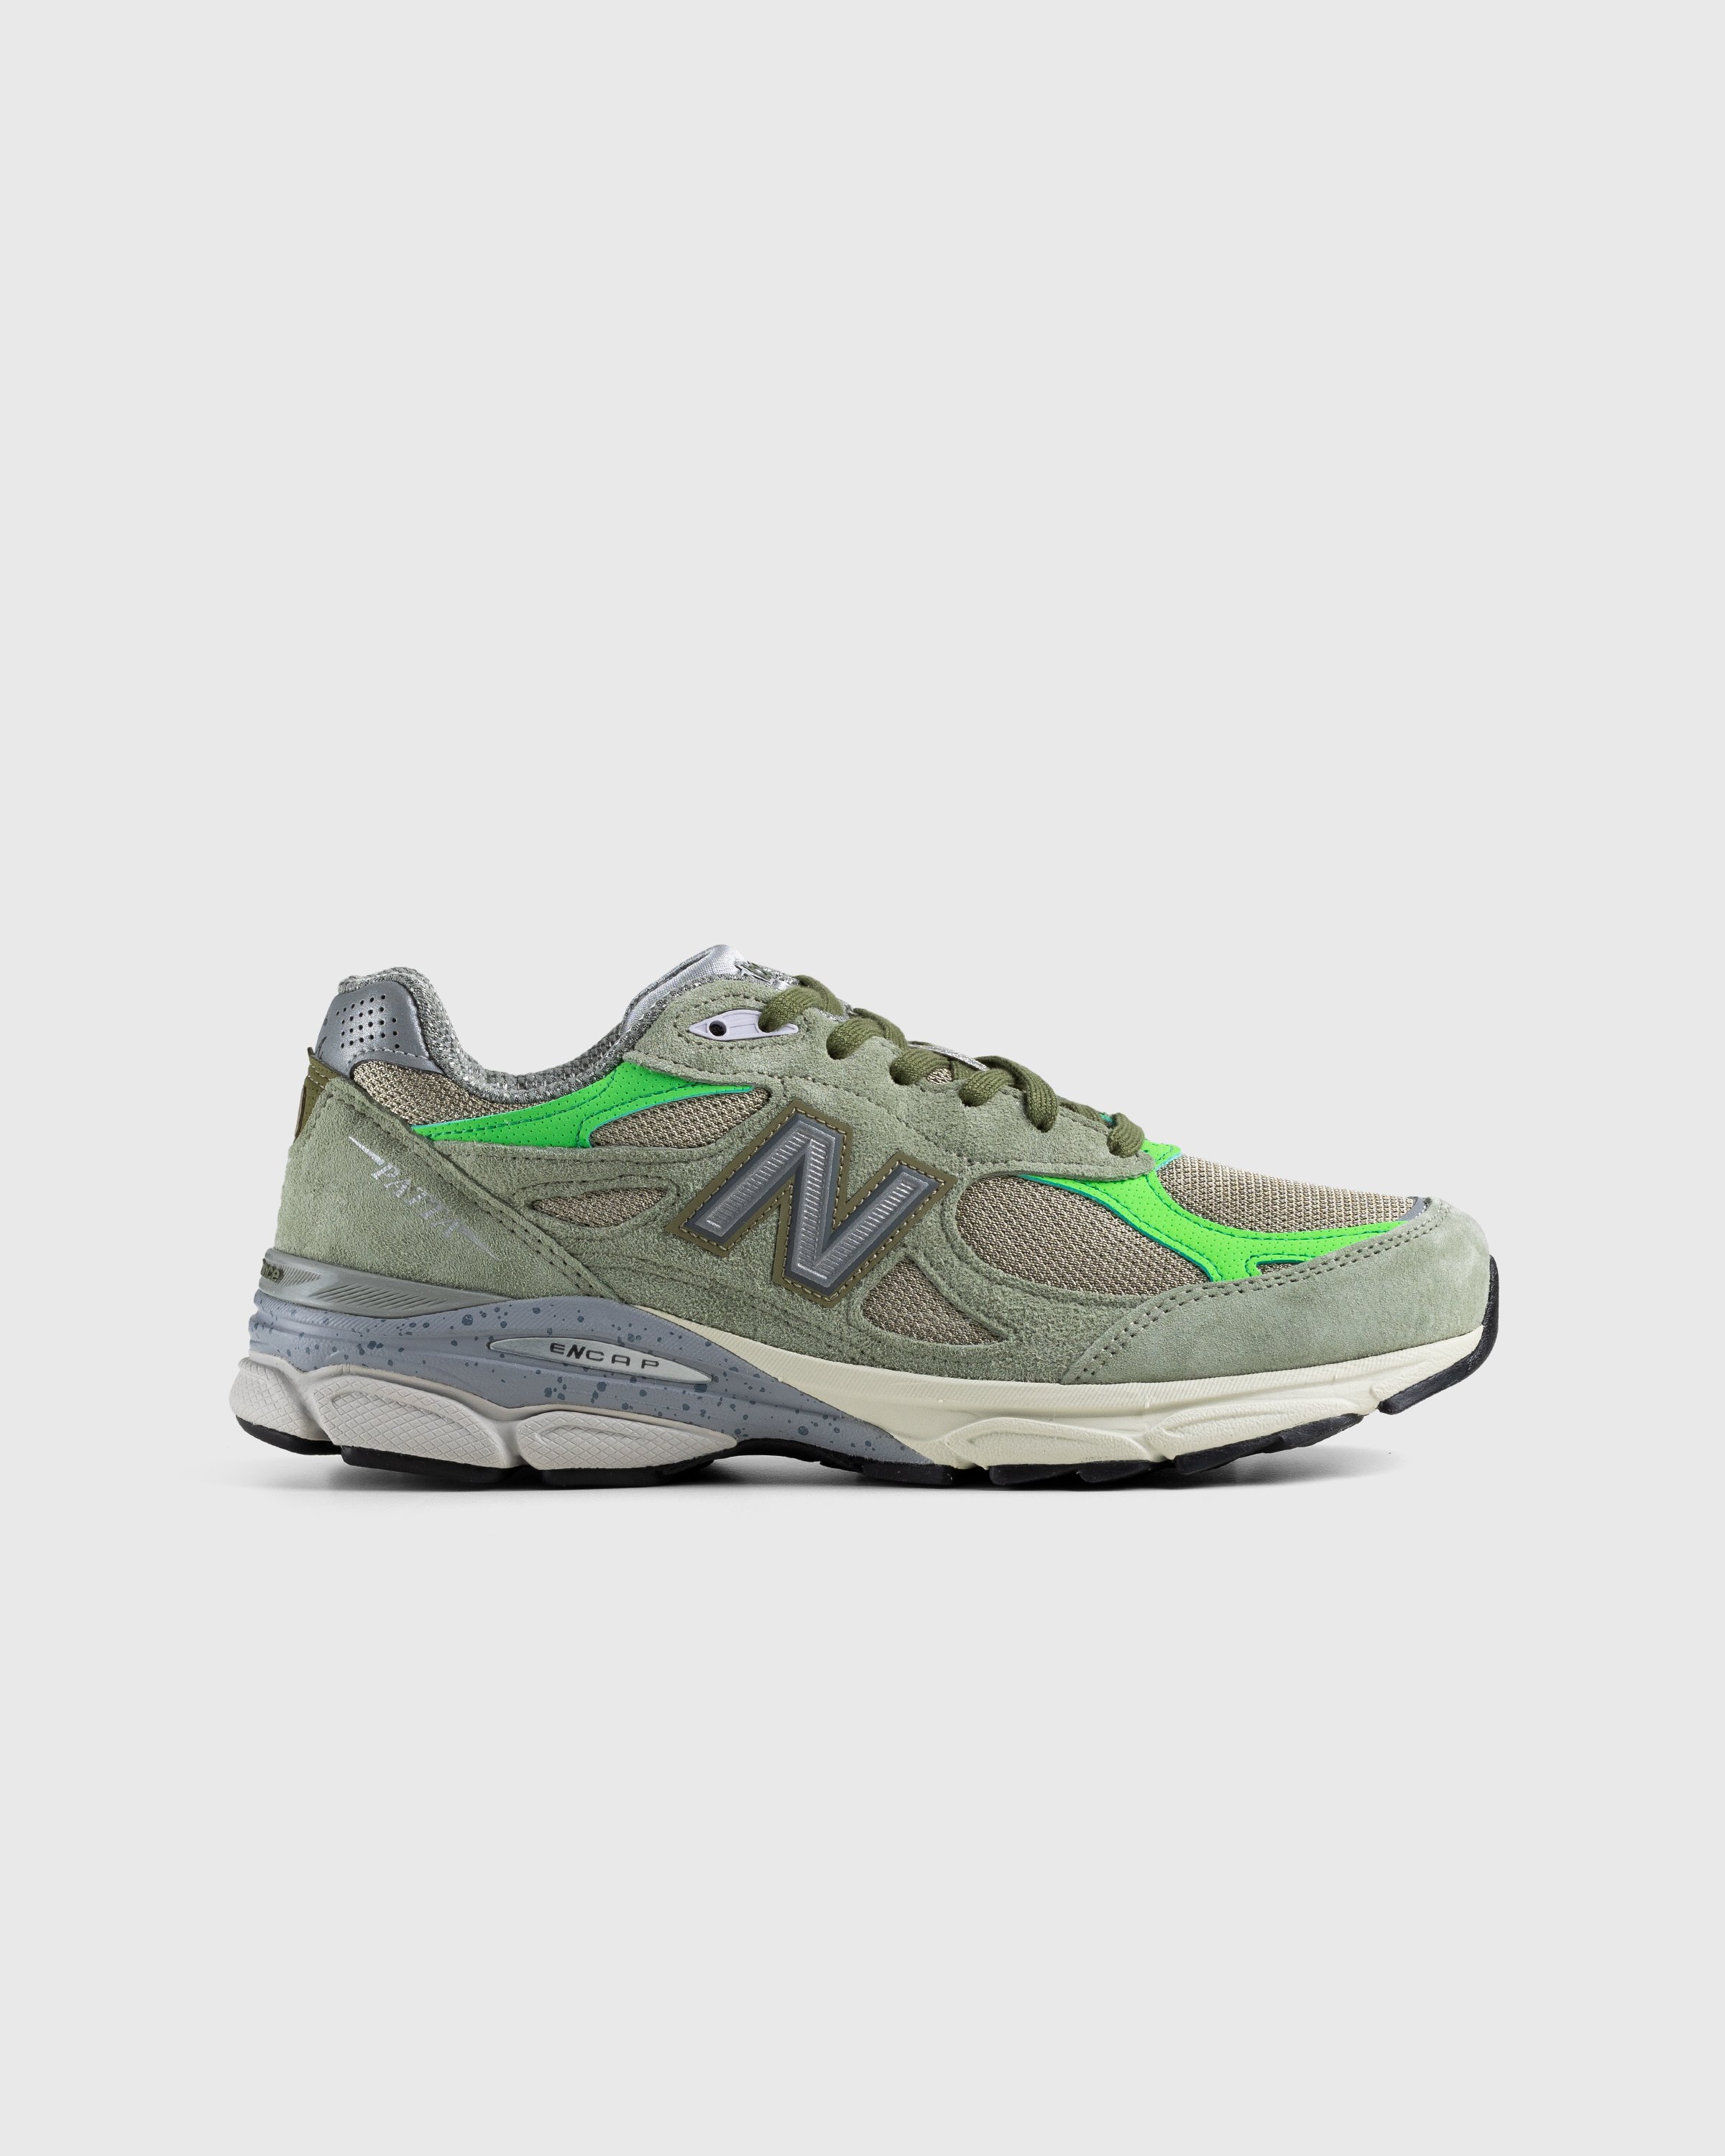 Patta x New Balance - M990PP3 Made in USA 990v3 Olive/White Pepper - Footwear - Green - Image 1